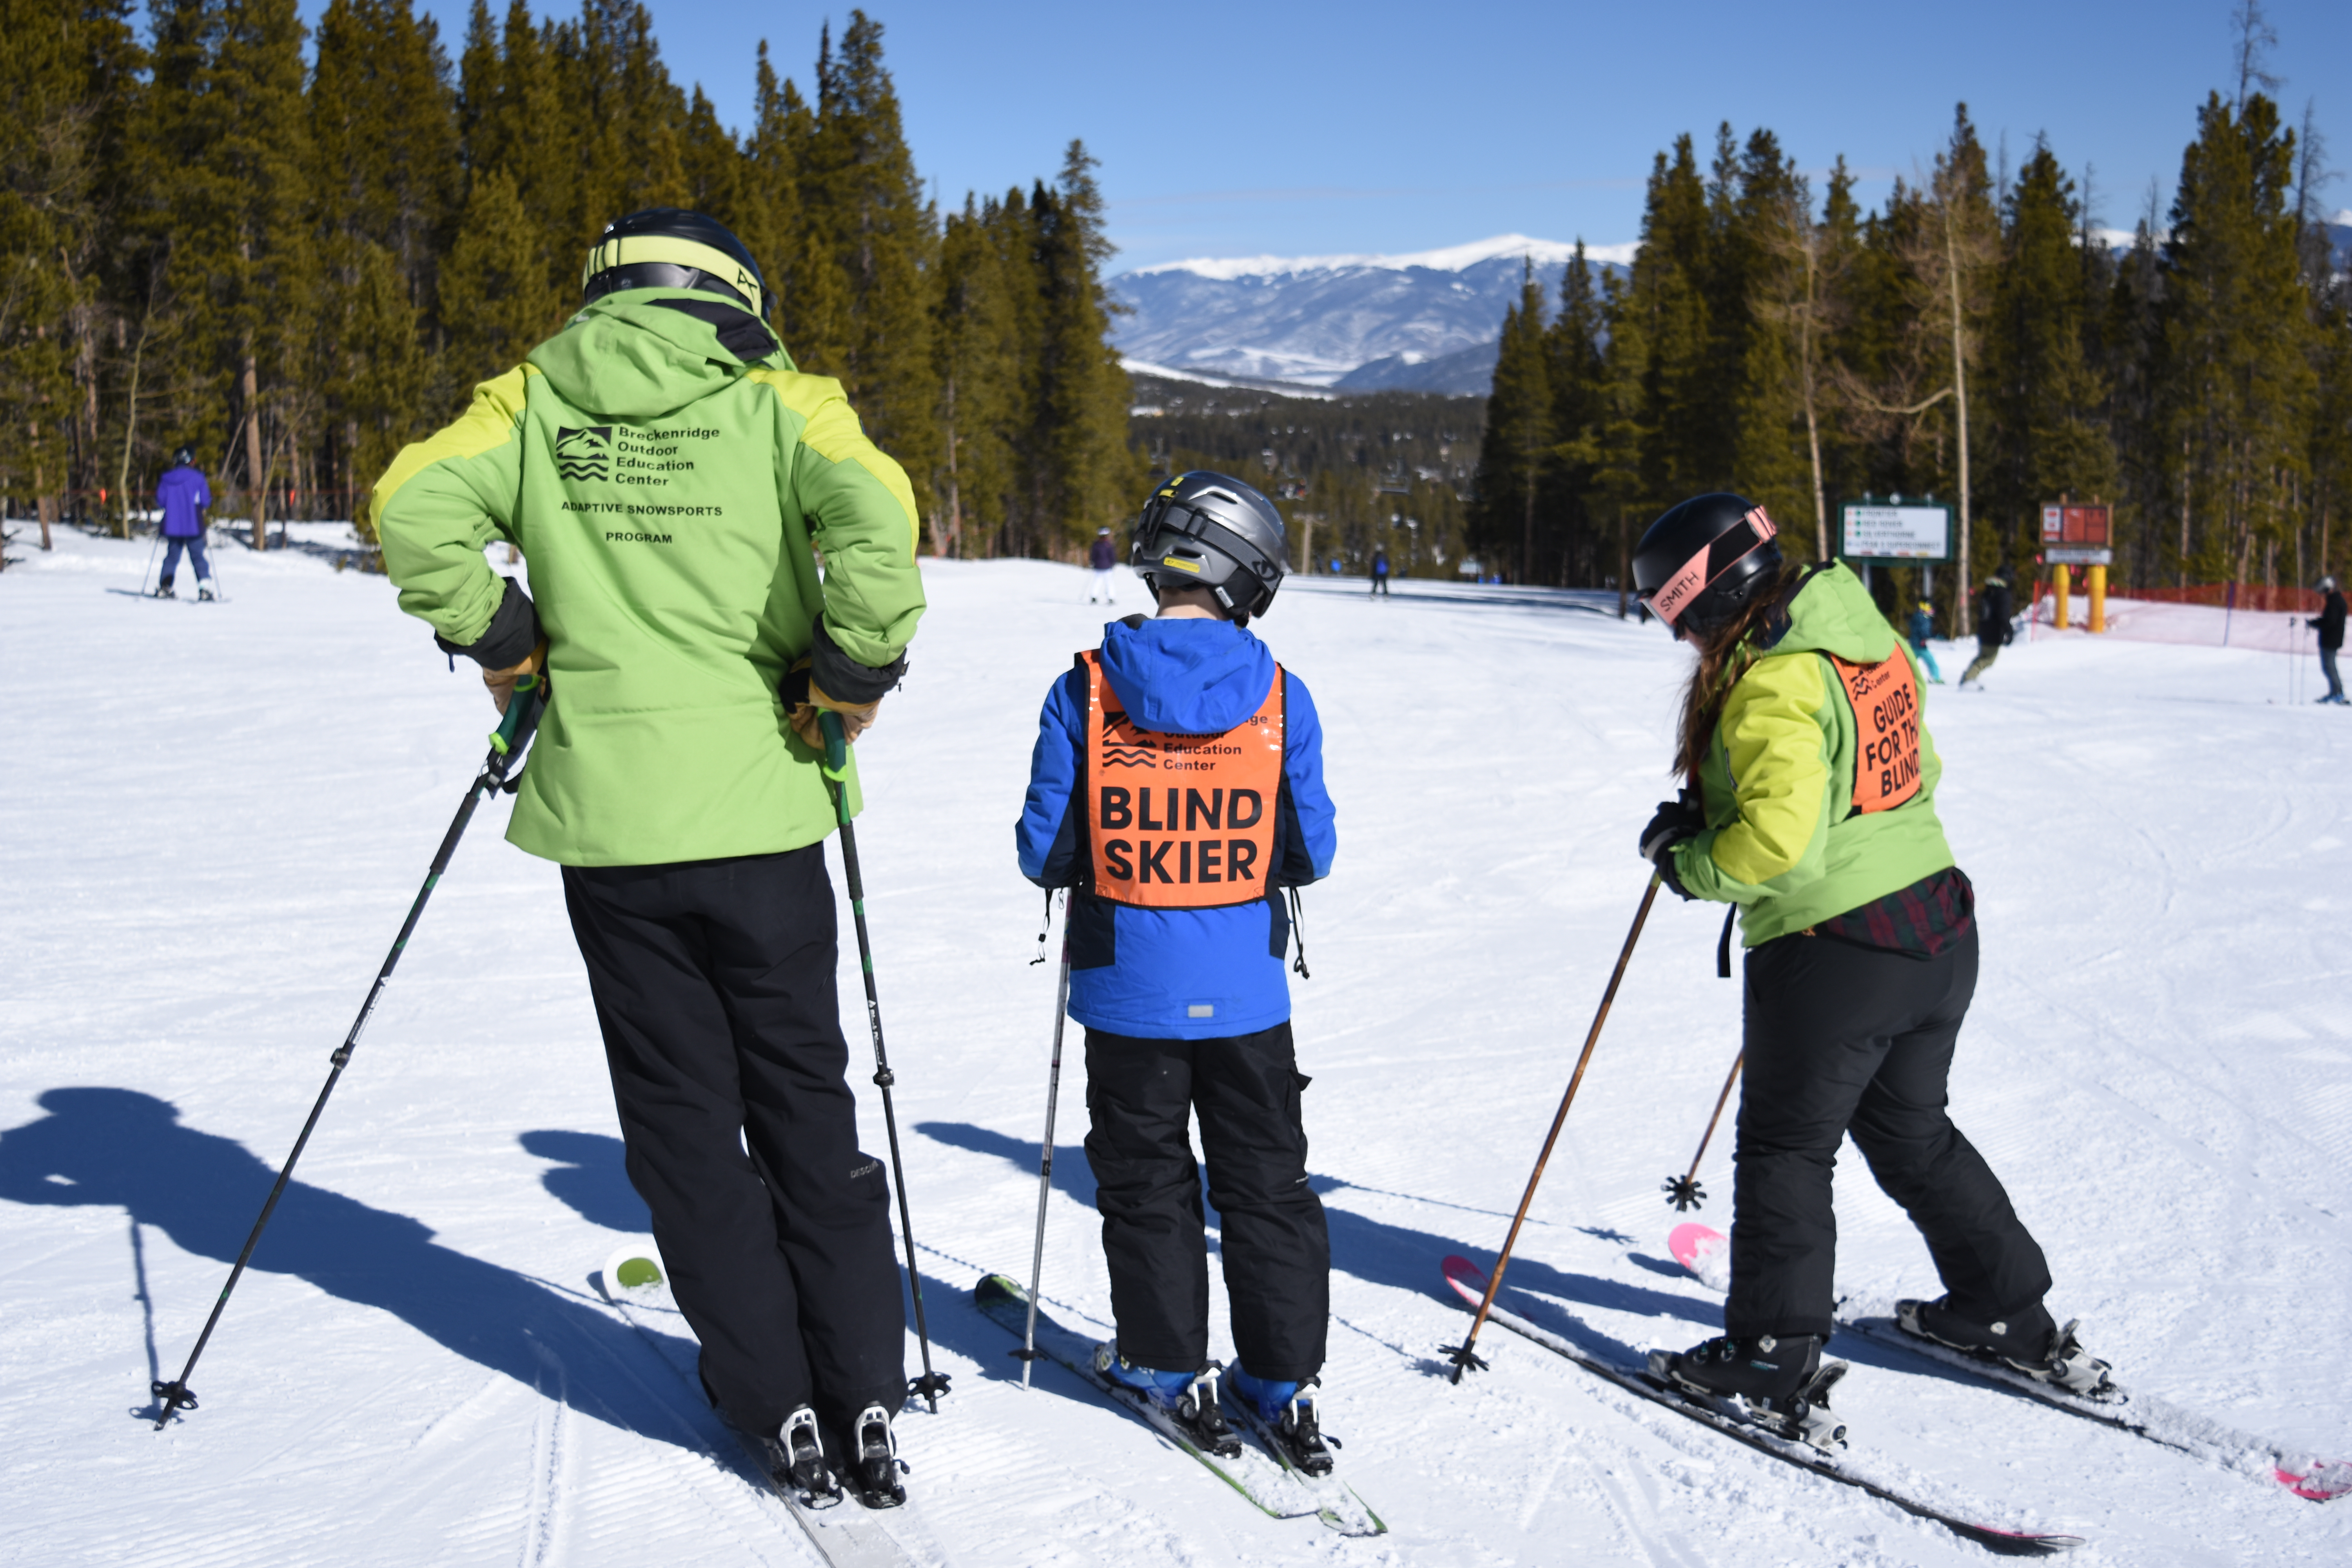 Cole Carper wears an orange blind skier vest over his bright blue jacket and stands between his two ski guides. They stand at the top of a run they are about to ski down. Trees and other skiers around them and snowcapped mountains in the distance.